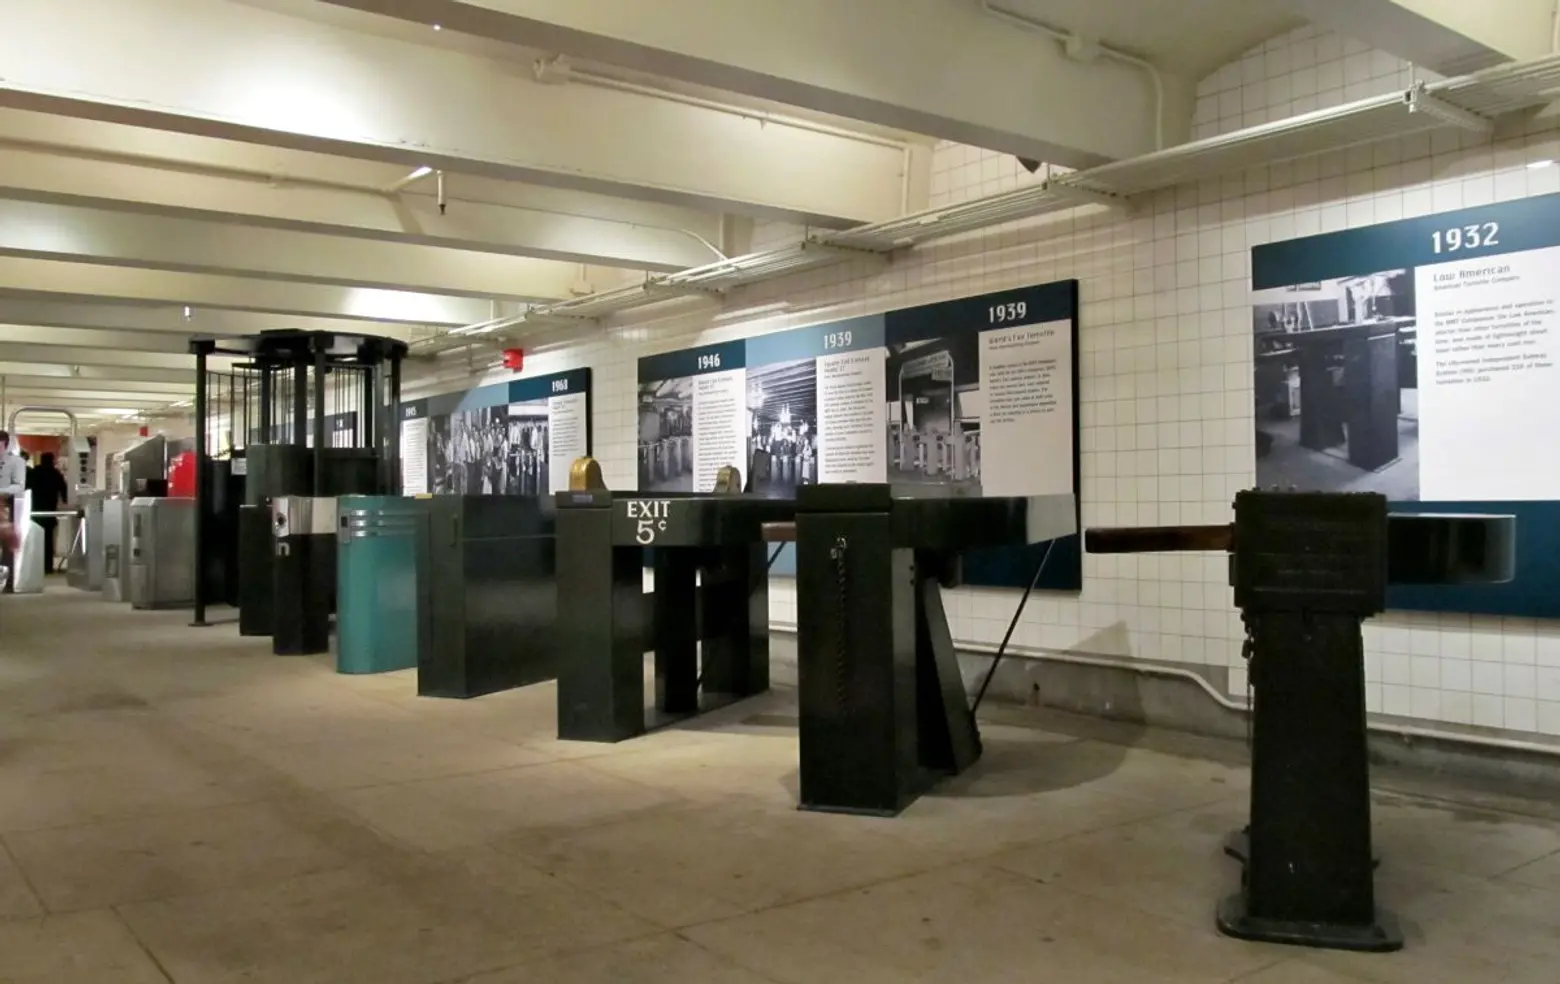 New York Transit Museum, turnstile exhibit, history of NYC subway, Brooklyn museums